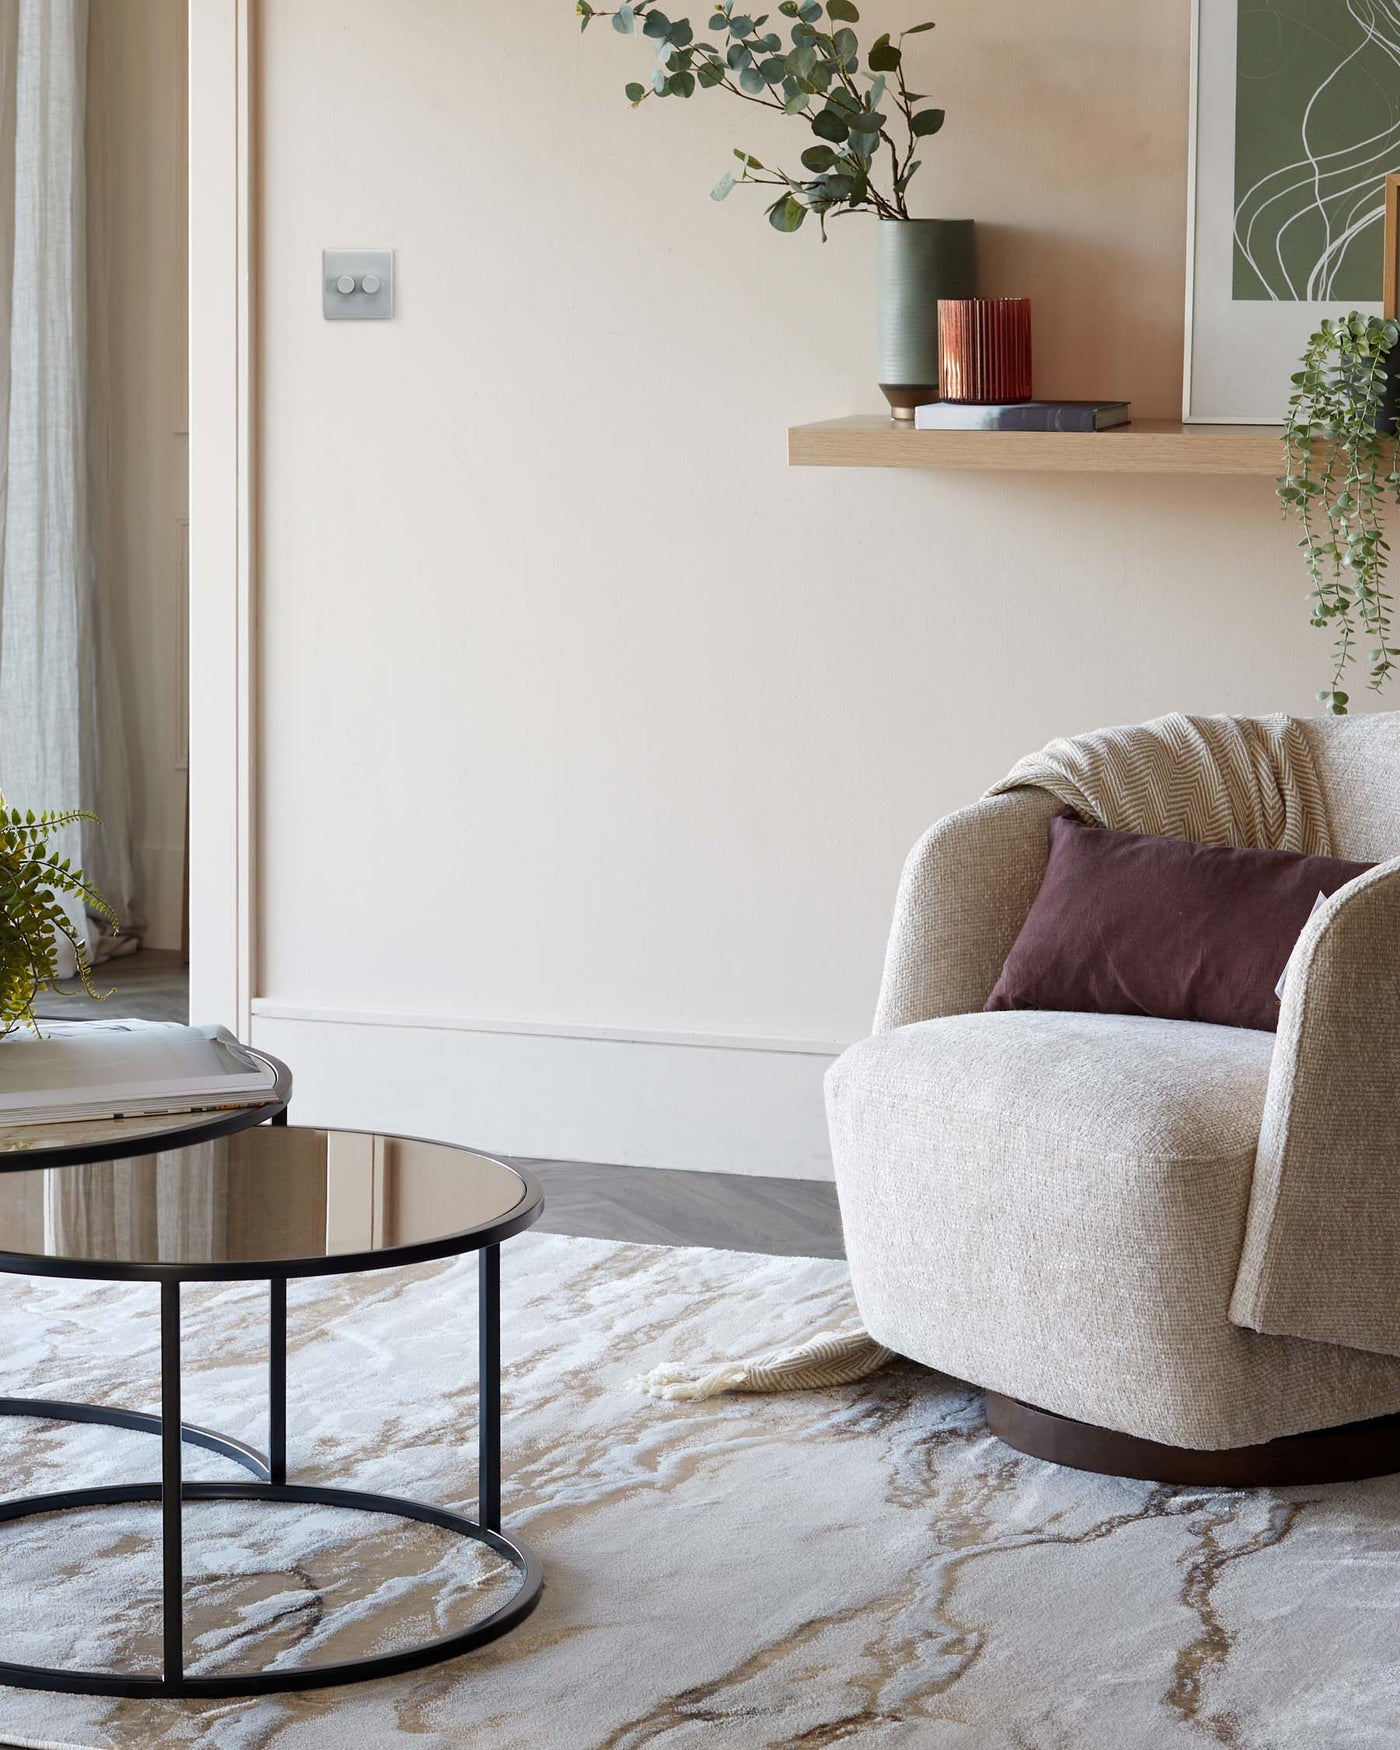 Modern living room featuring a round, black-framed glass-top coffee table and a cosy beige upholstered armchair with a textured throw pillow. An ornamental floating wooden shelf is mounted above, adorned with potted greenery and decorative objects.